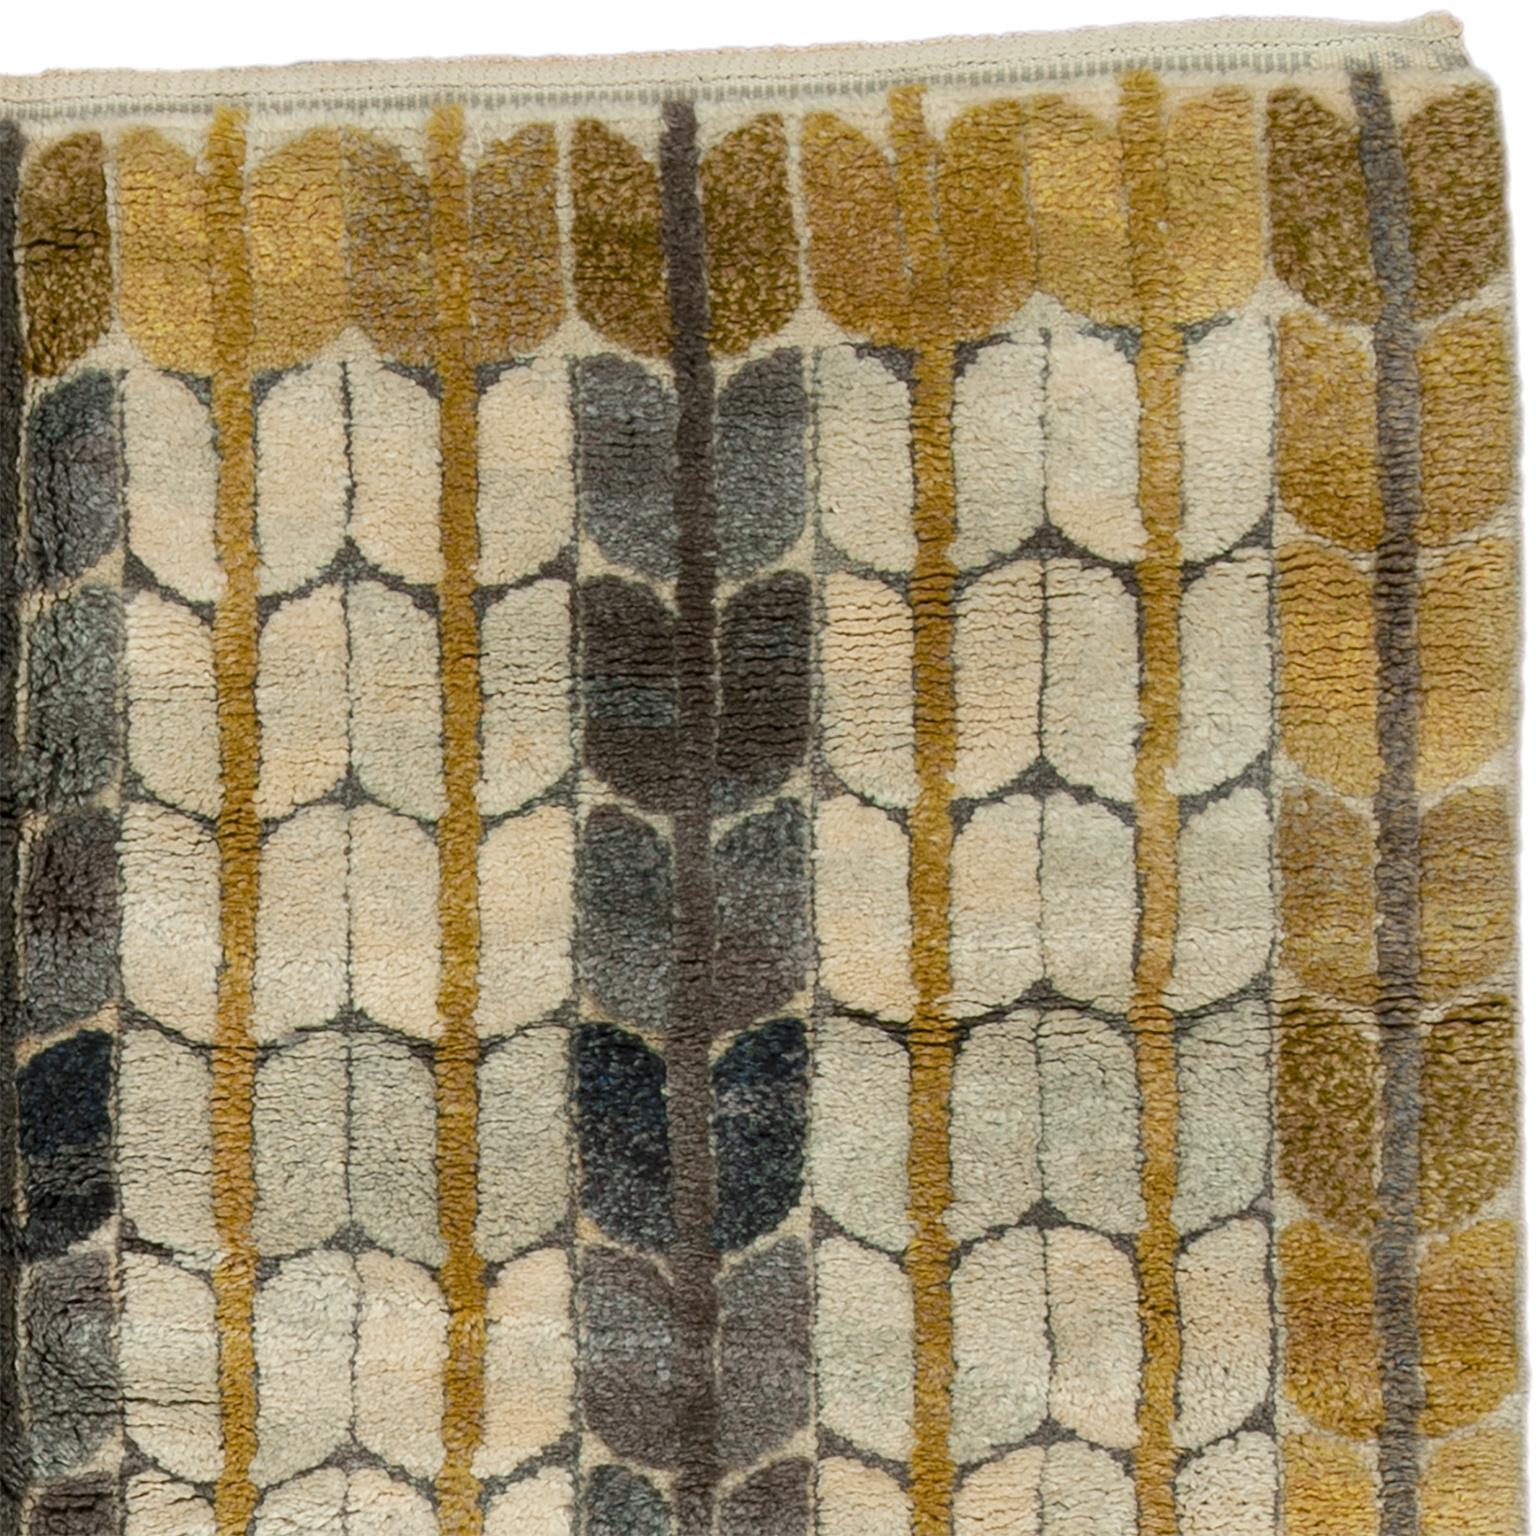 Mid-20th Century Swedish Pile Rug by Ingrid Dessau In Good Condition For Sale In New York, NY